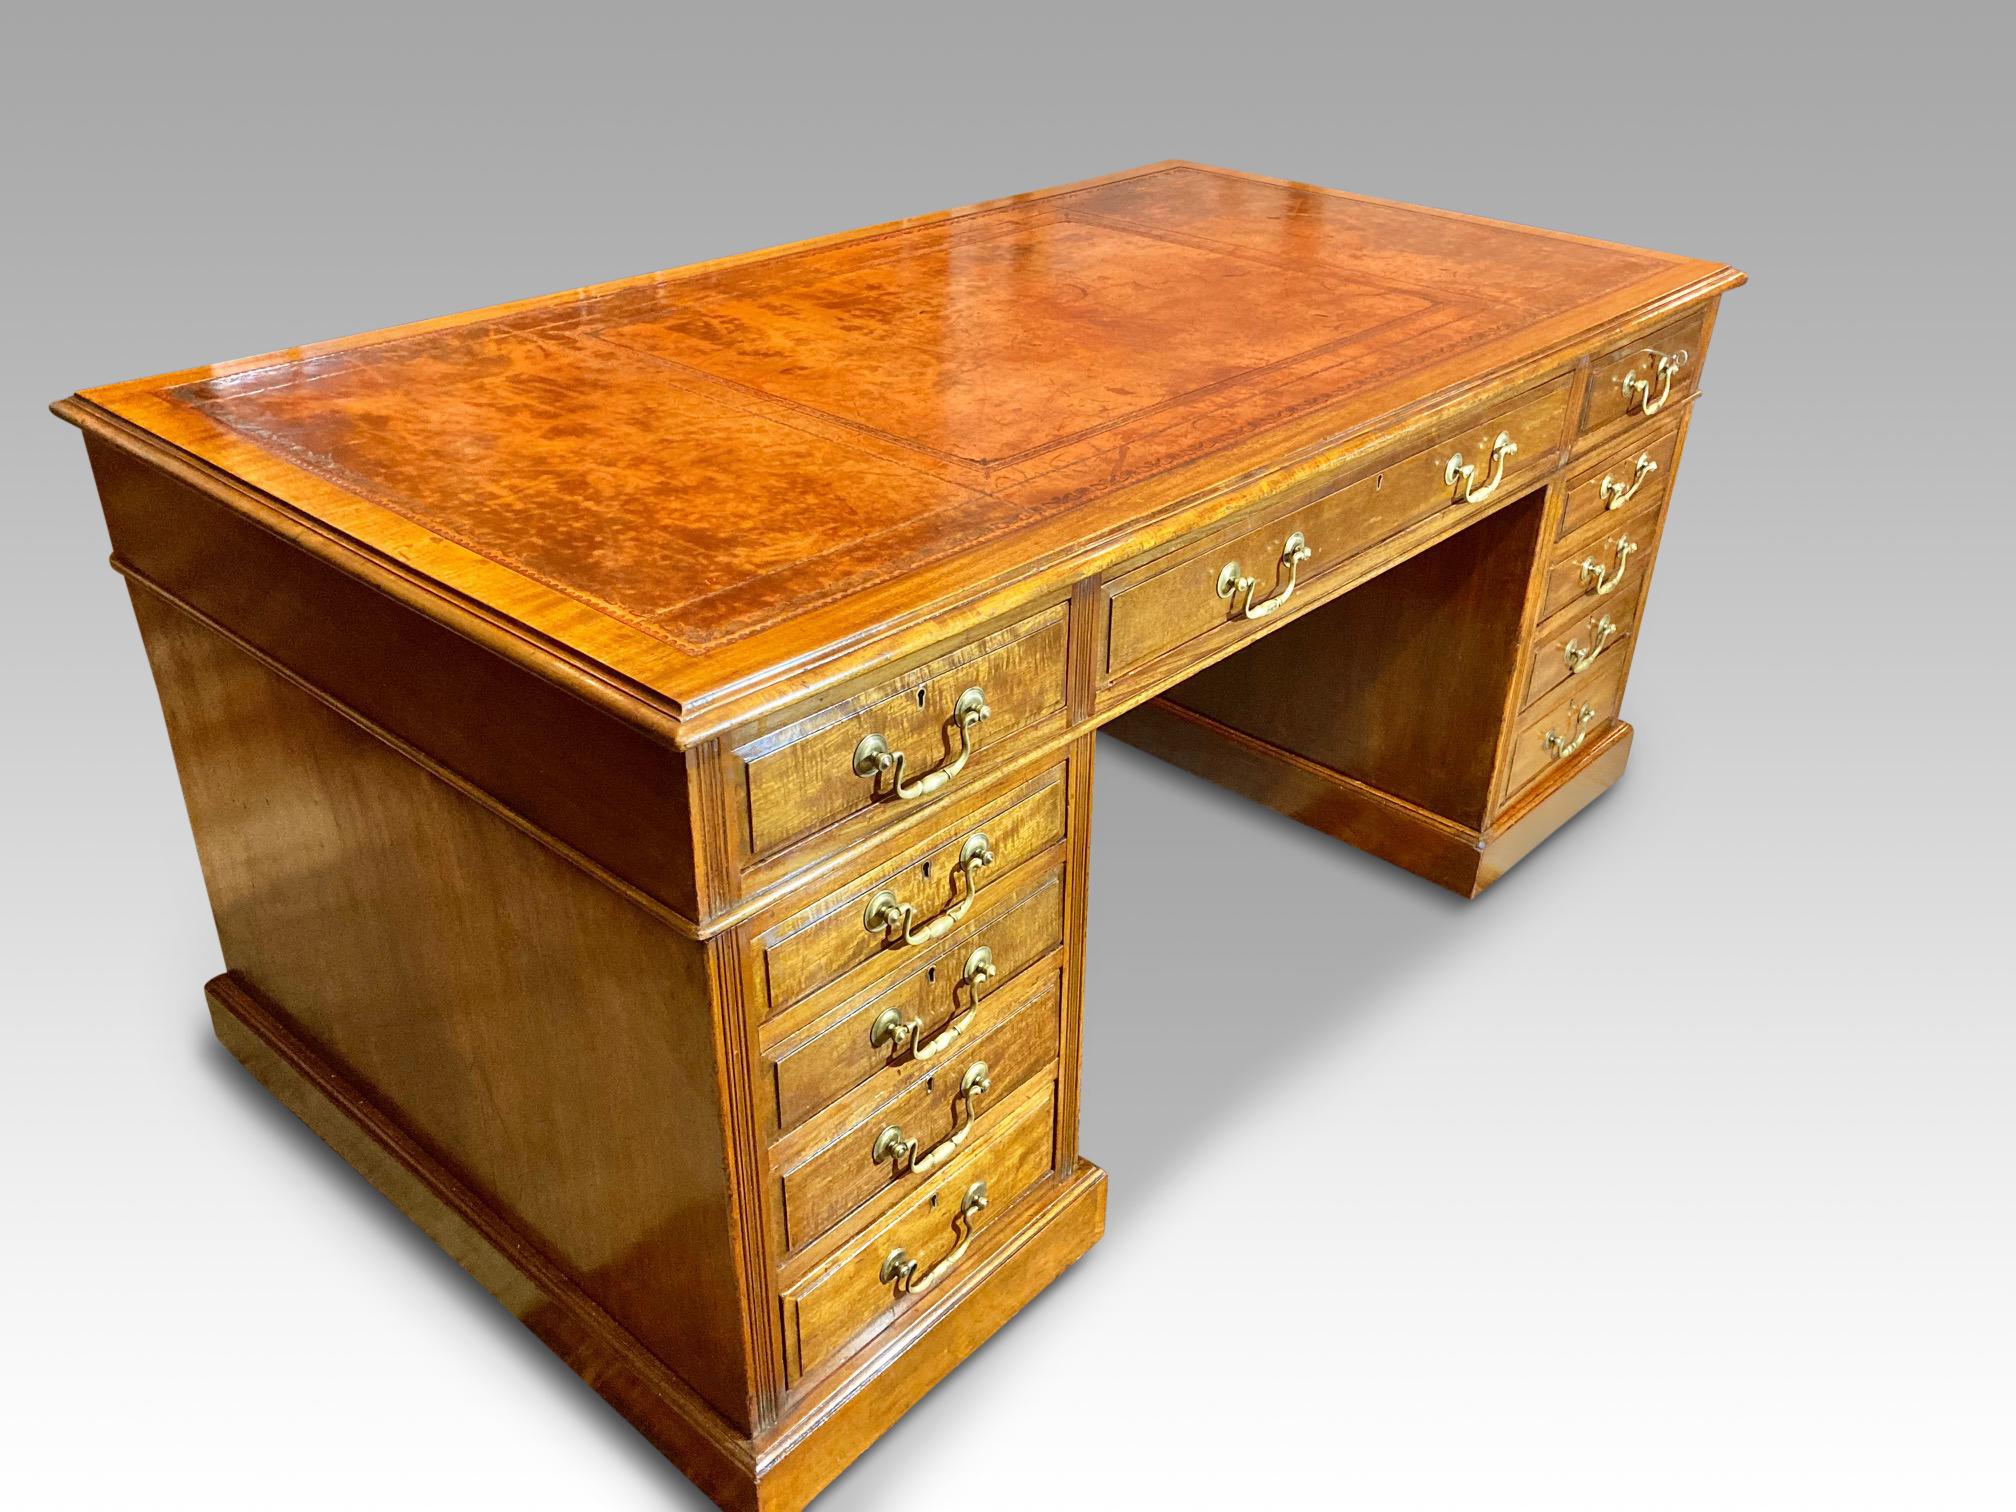 Large mahogany pedestal writing desk, English, circa 1900. Ideal for commercial and home office. This is a smart professionals desk from a smoke free home, looking for the same!
A very large and substantial desk, featuring eleven smoothly deep